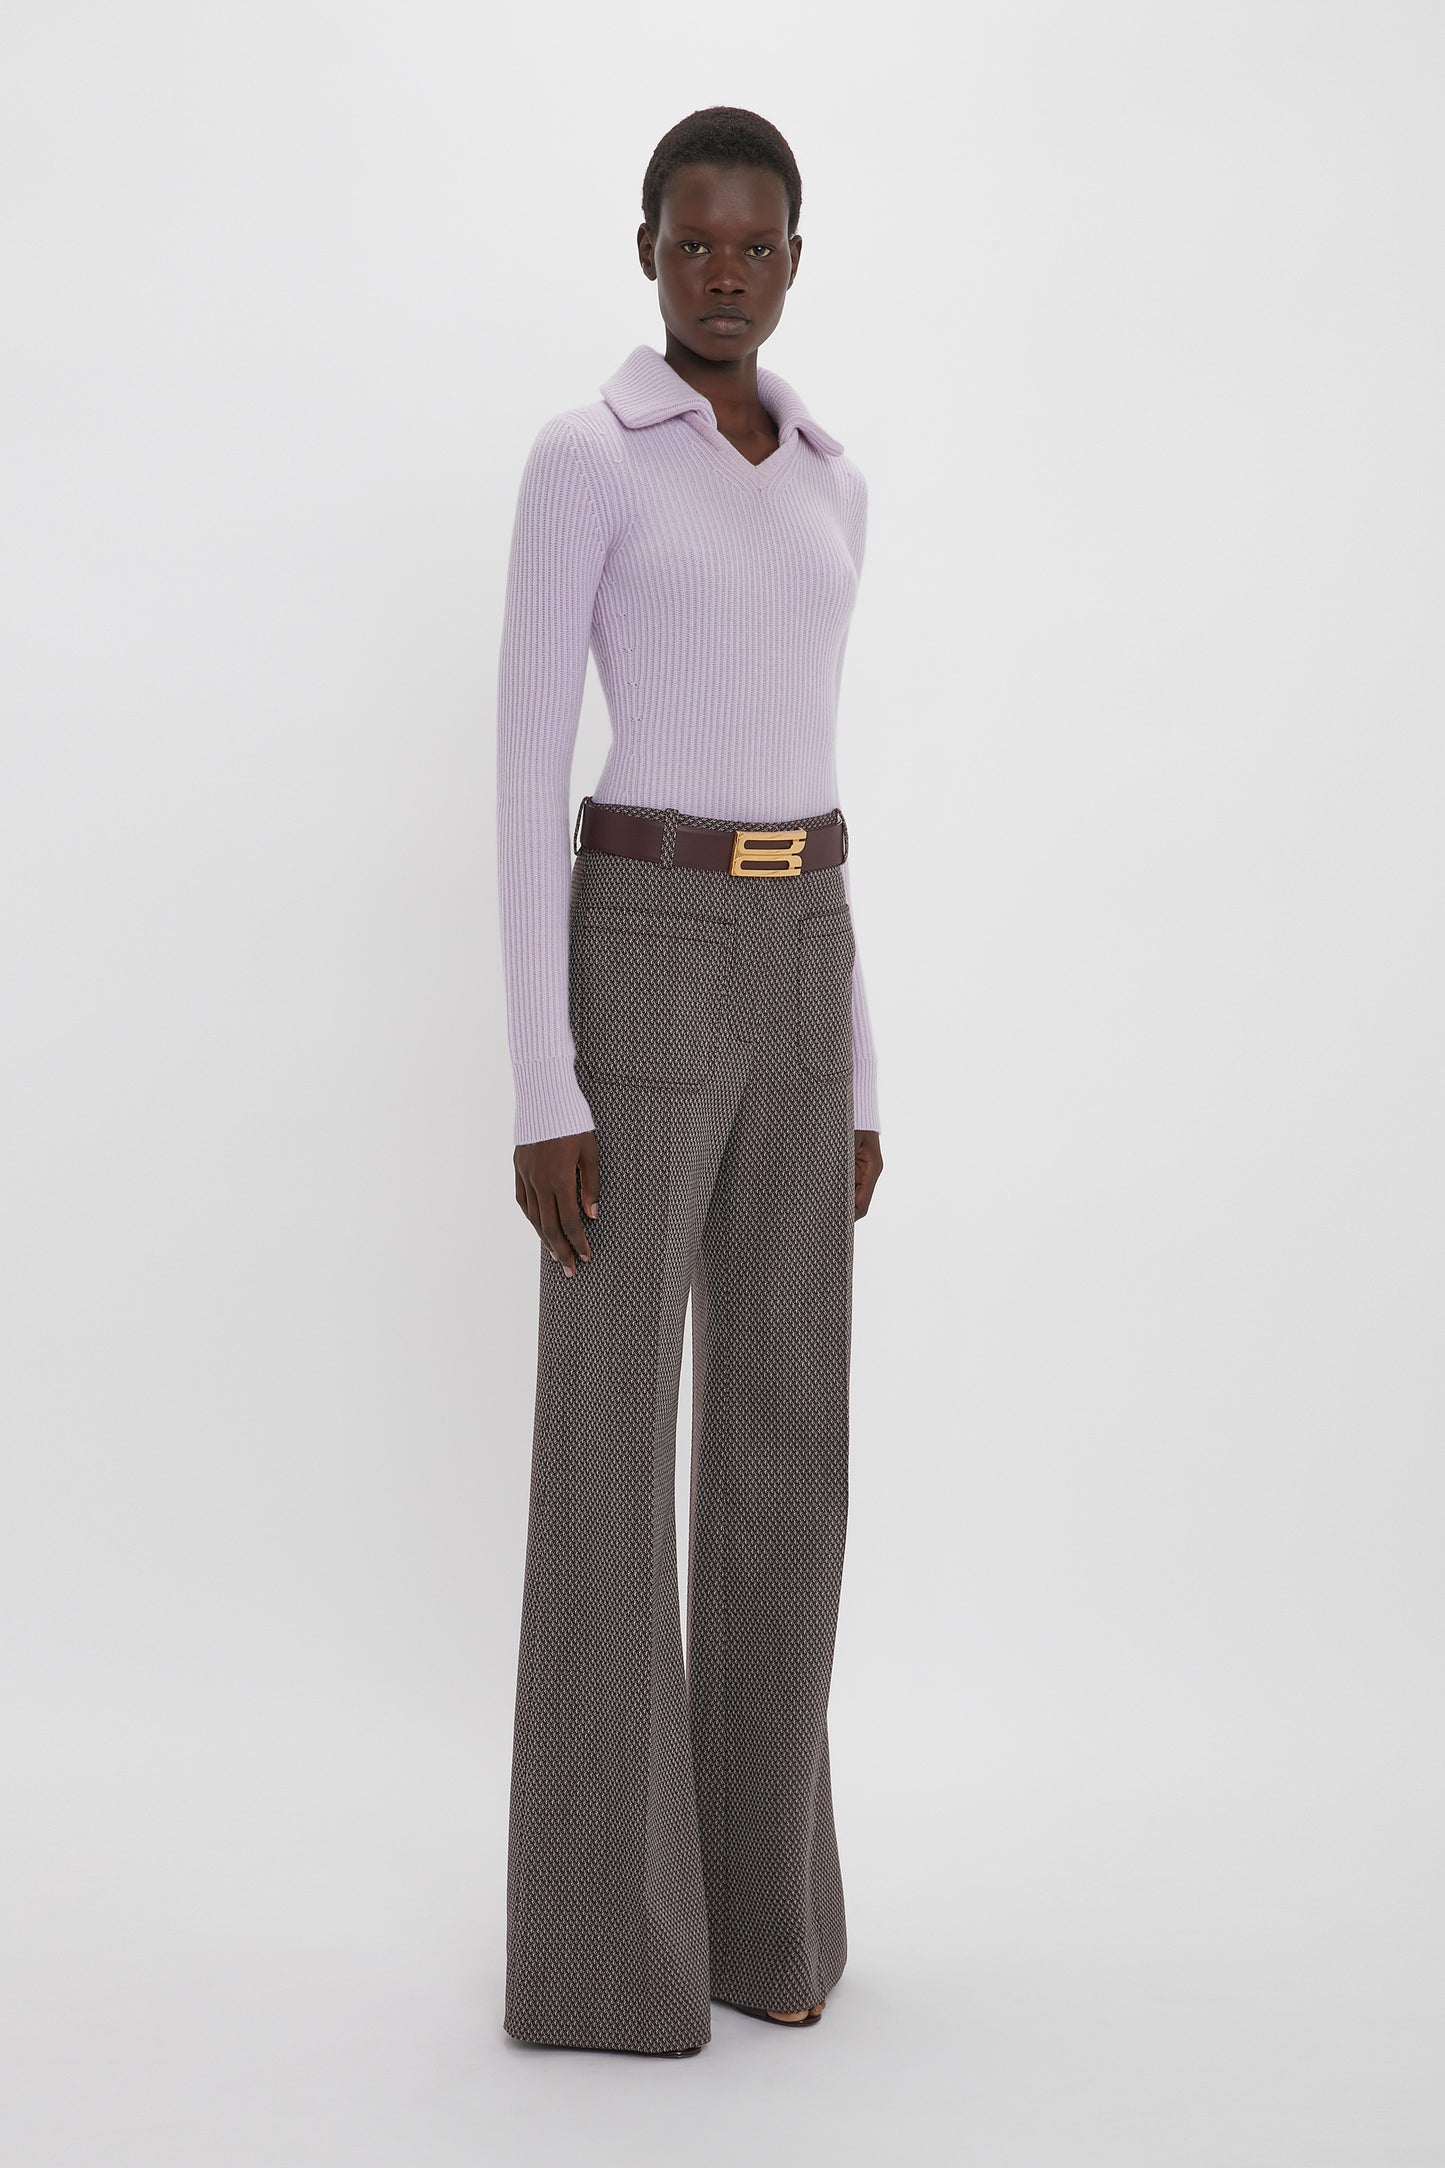 A person stands against a plain background wearing a Victoria Beckham Double Collared Jumper In Petunia and brown wide-leg trousers with a belt.